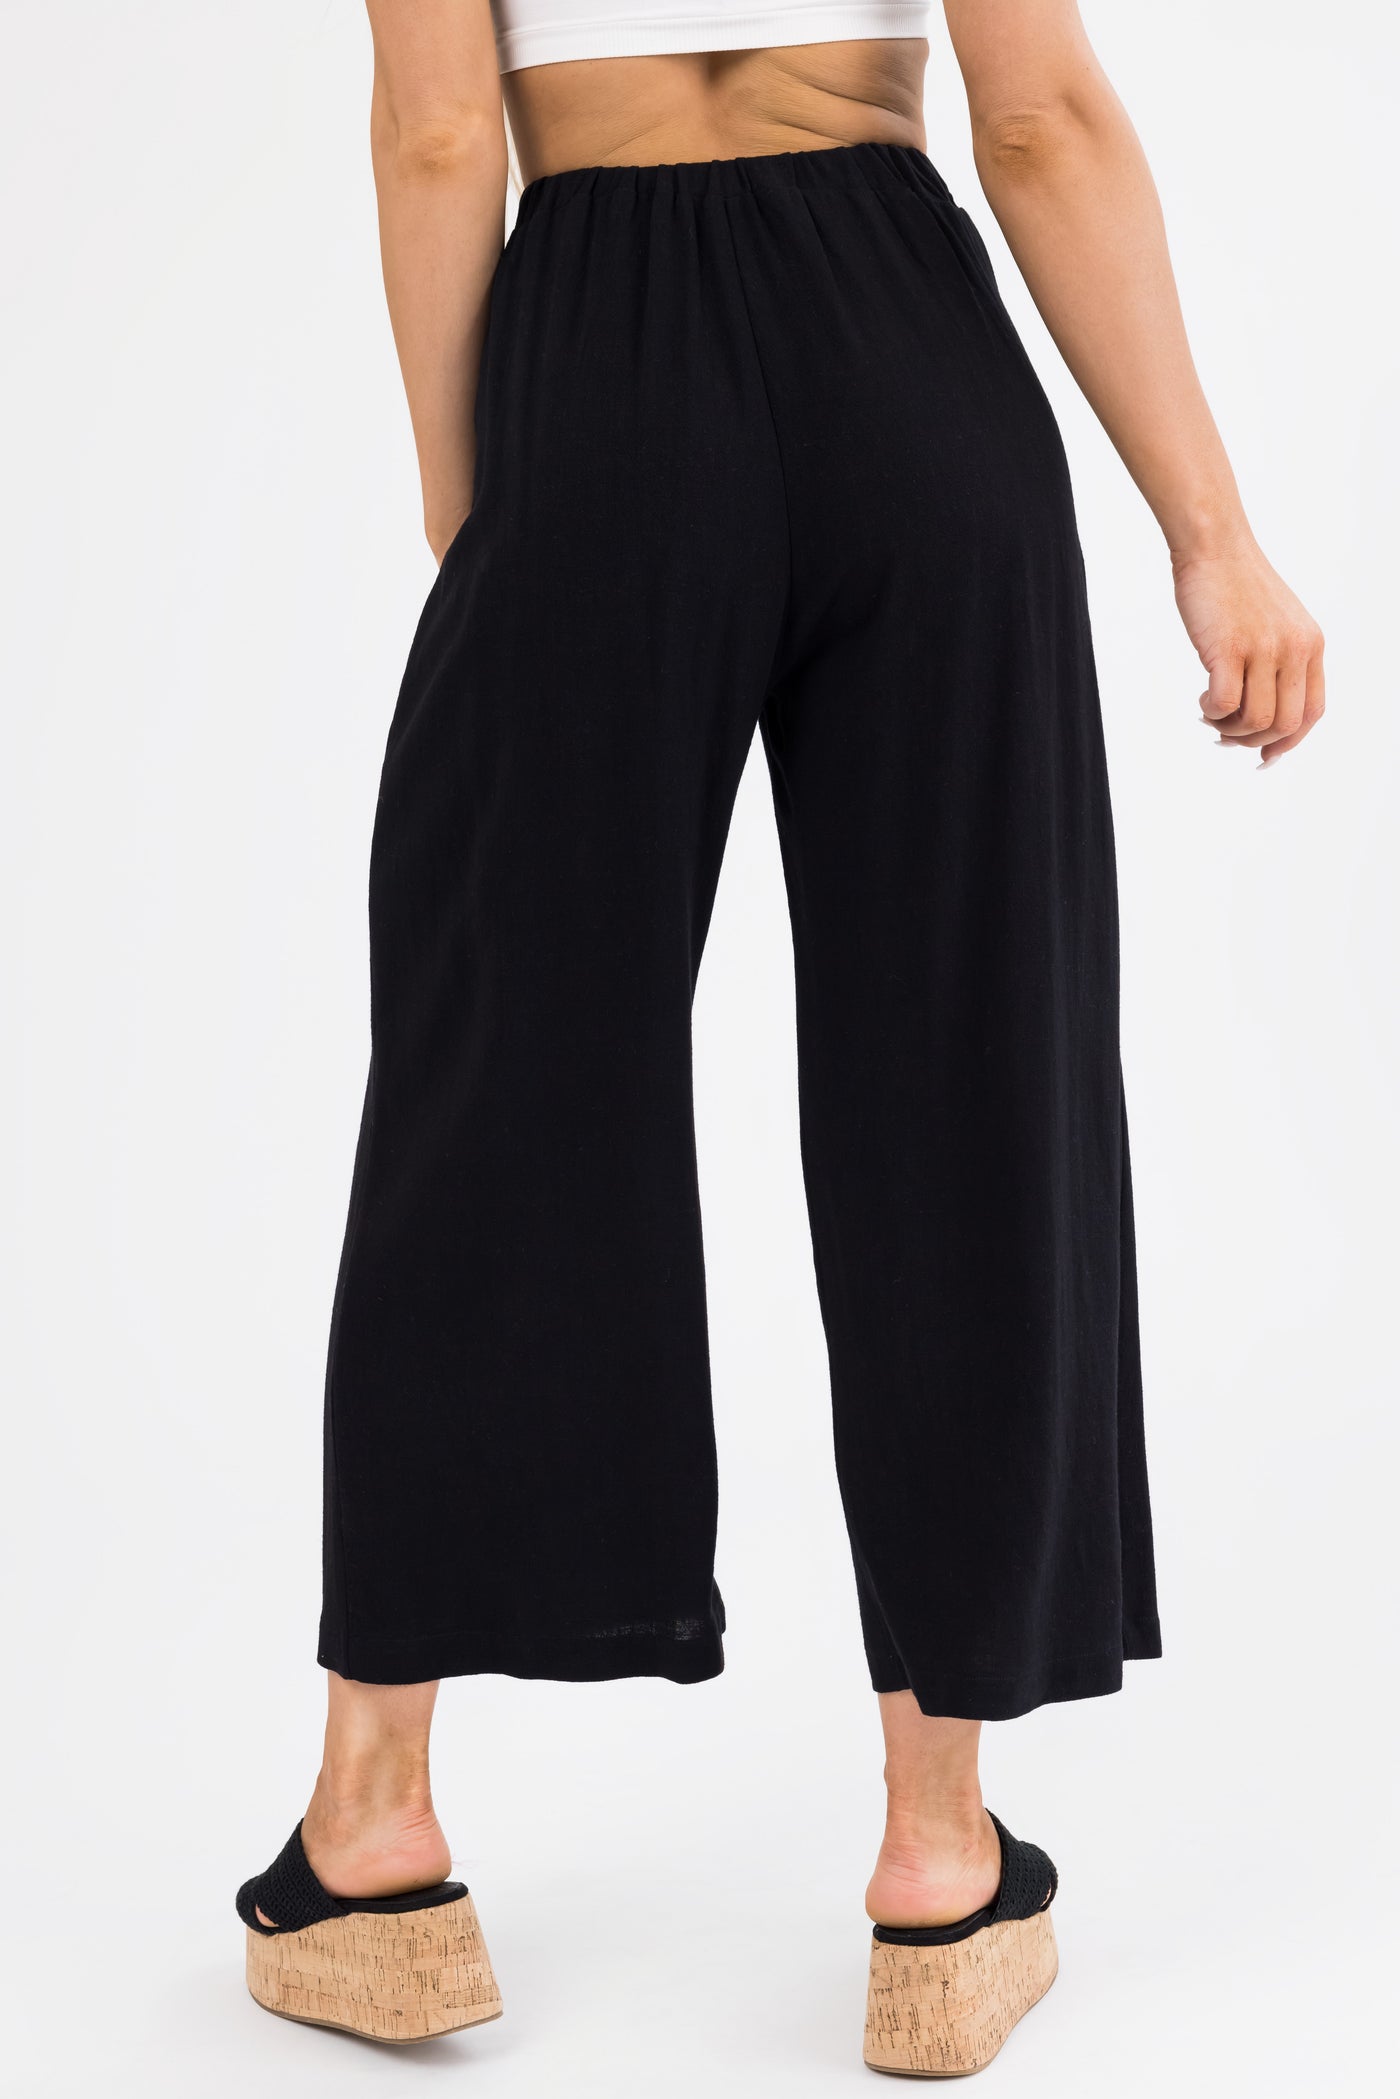 Black Pleated Cropped Palazzo Pants